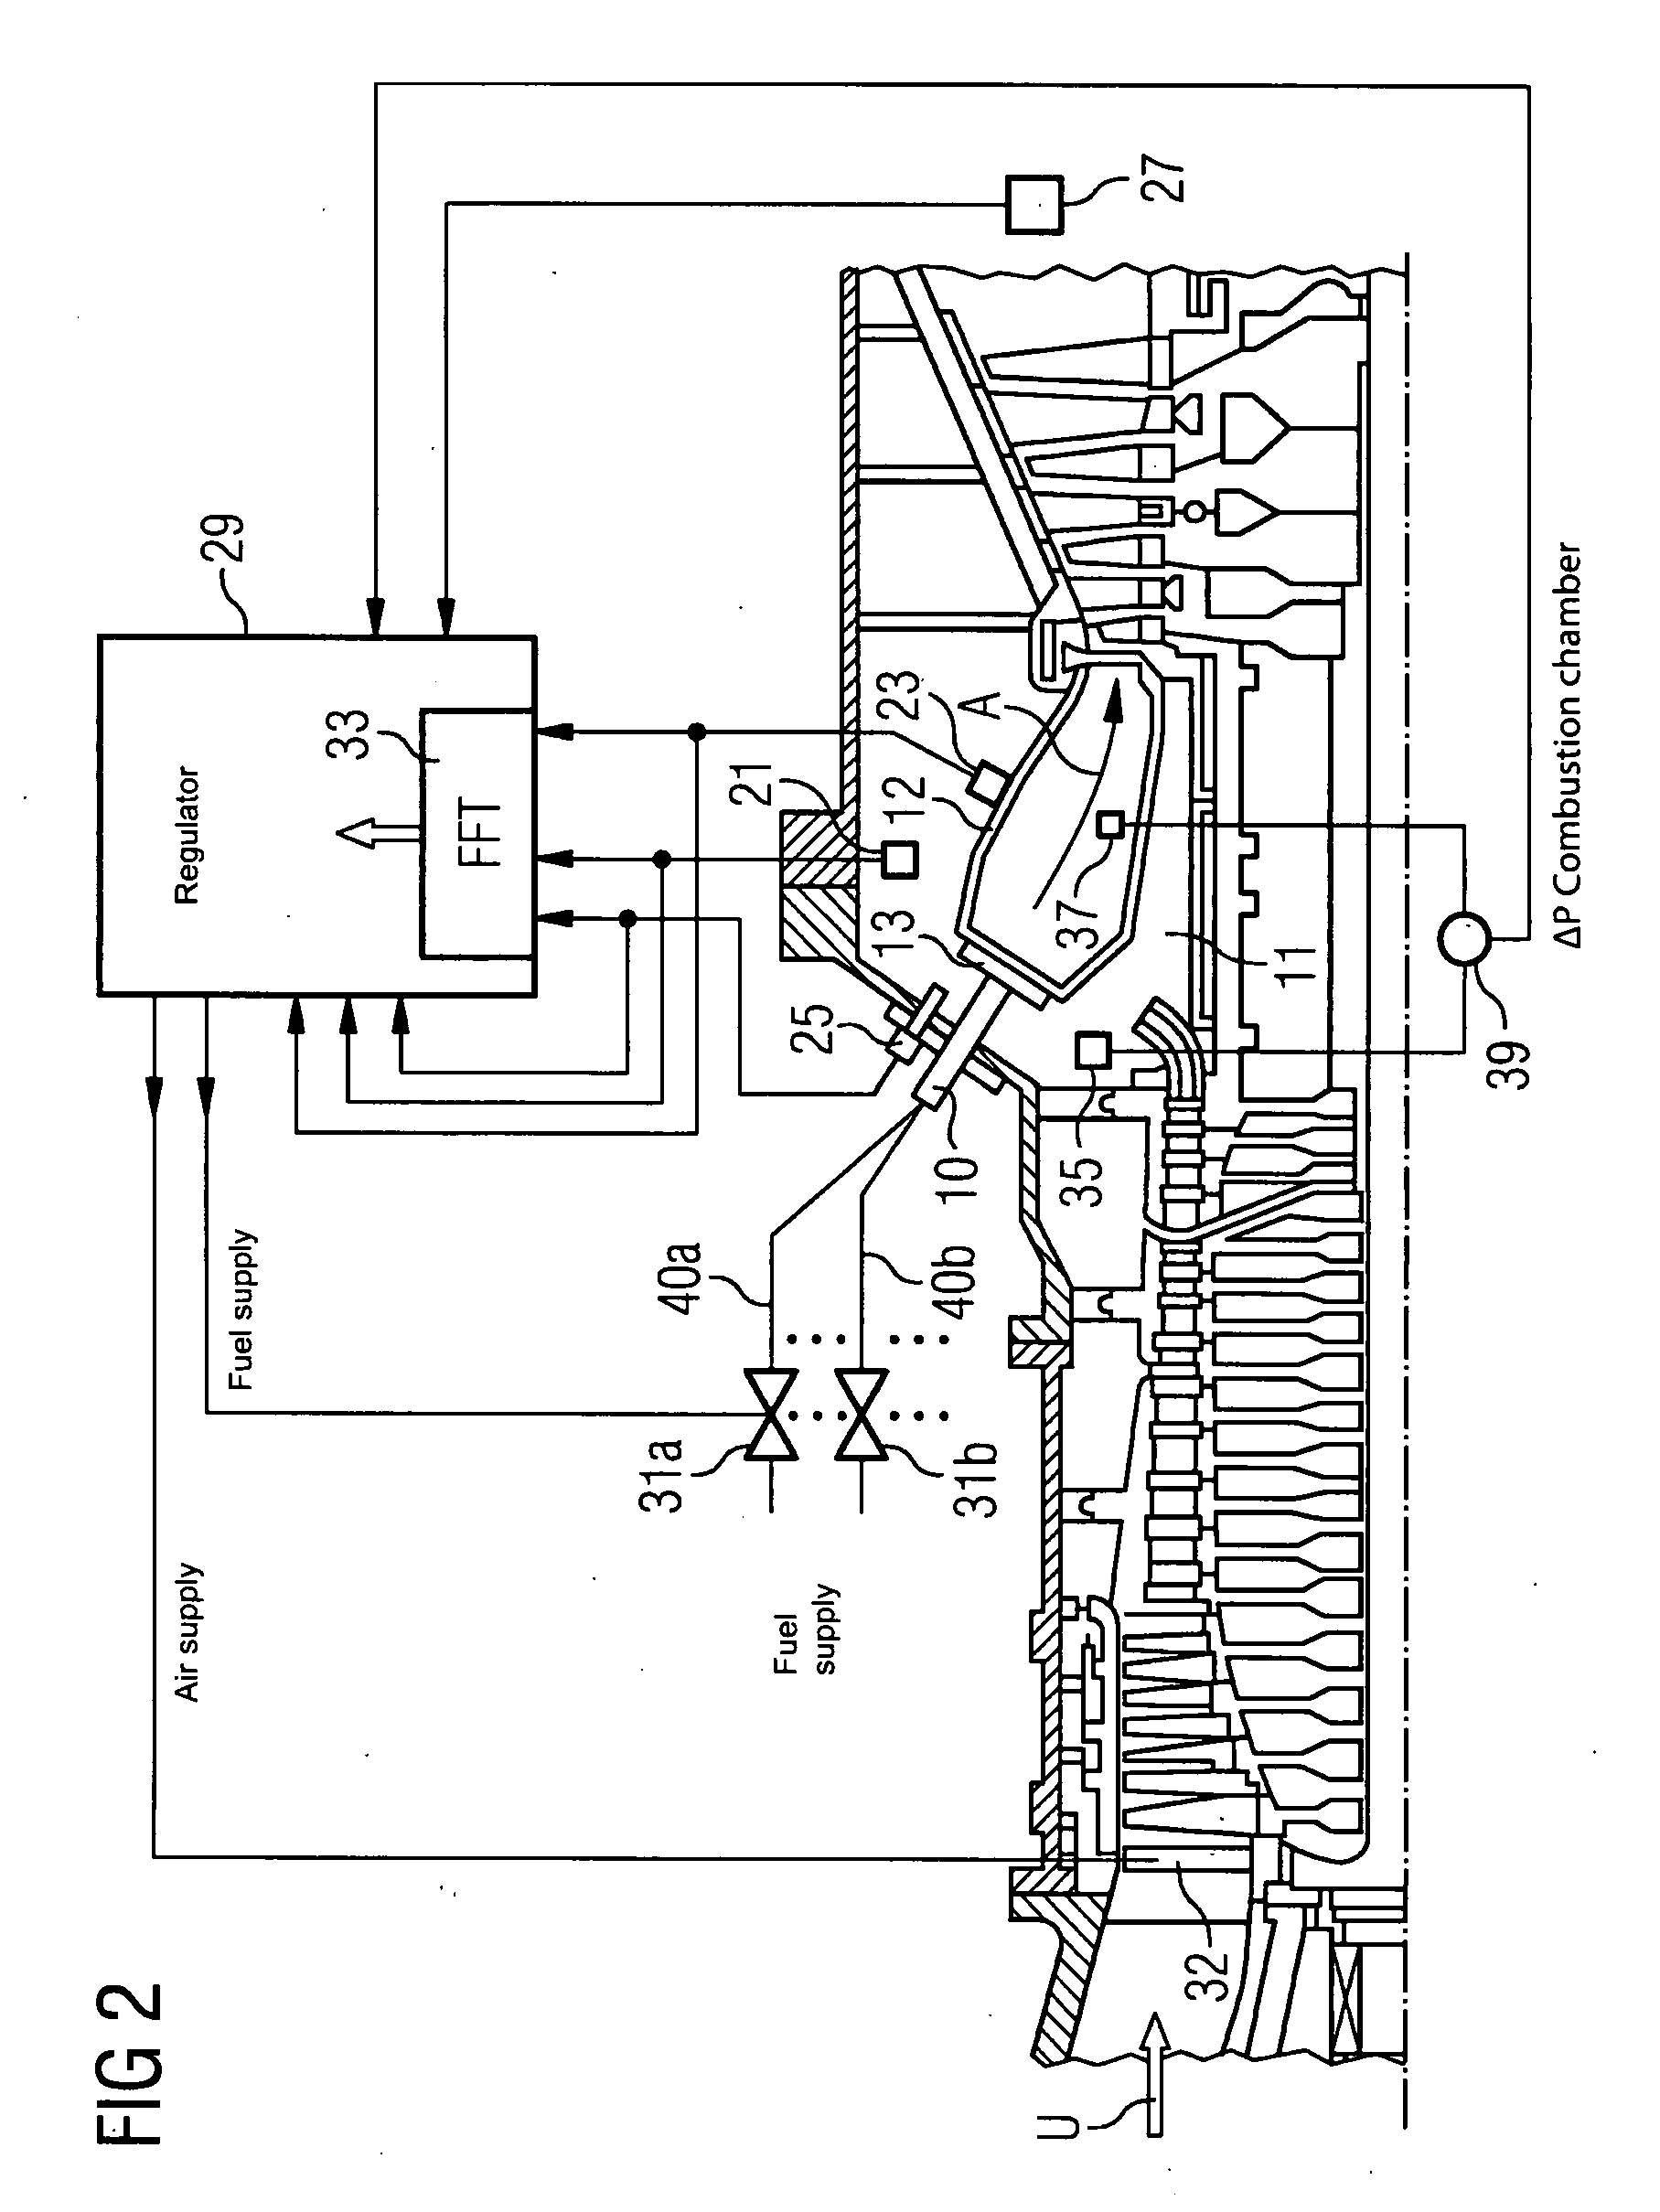 Method and Device for Regulating the Operating Line of a Gas Turbine Combustion Chamber